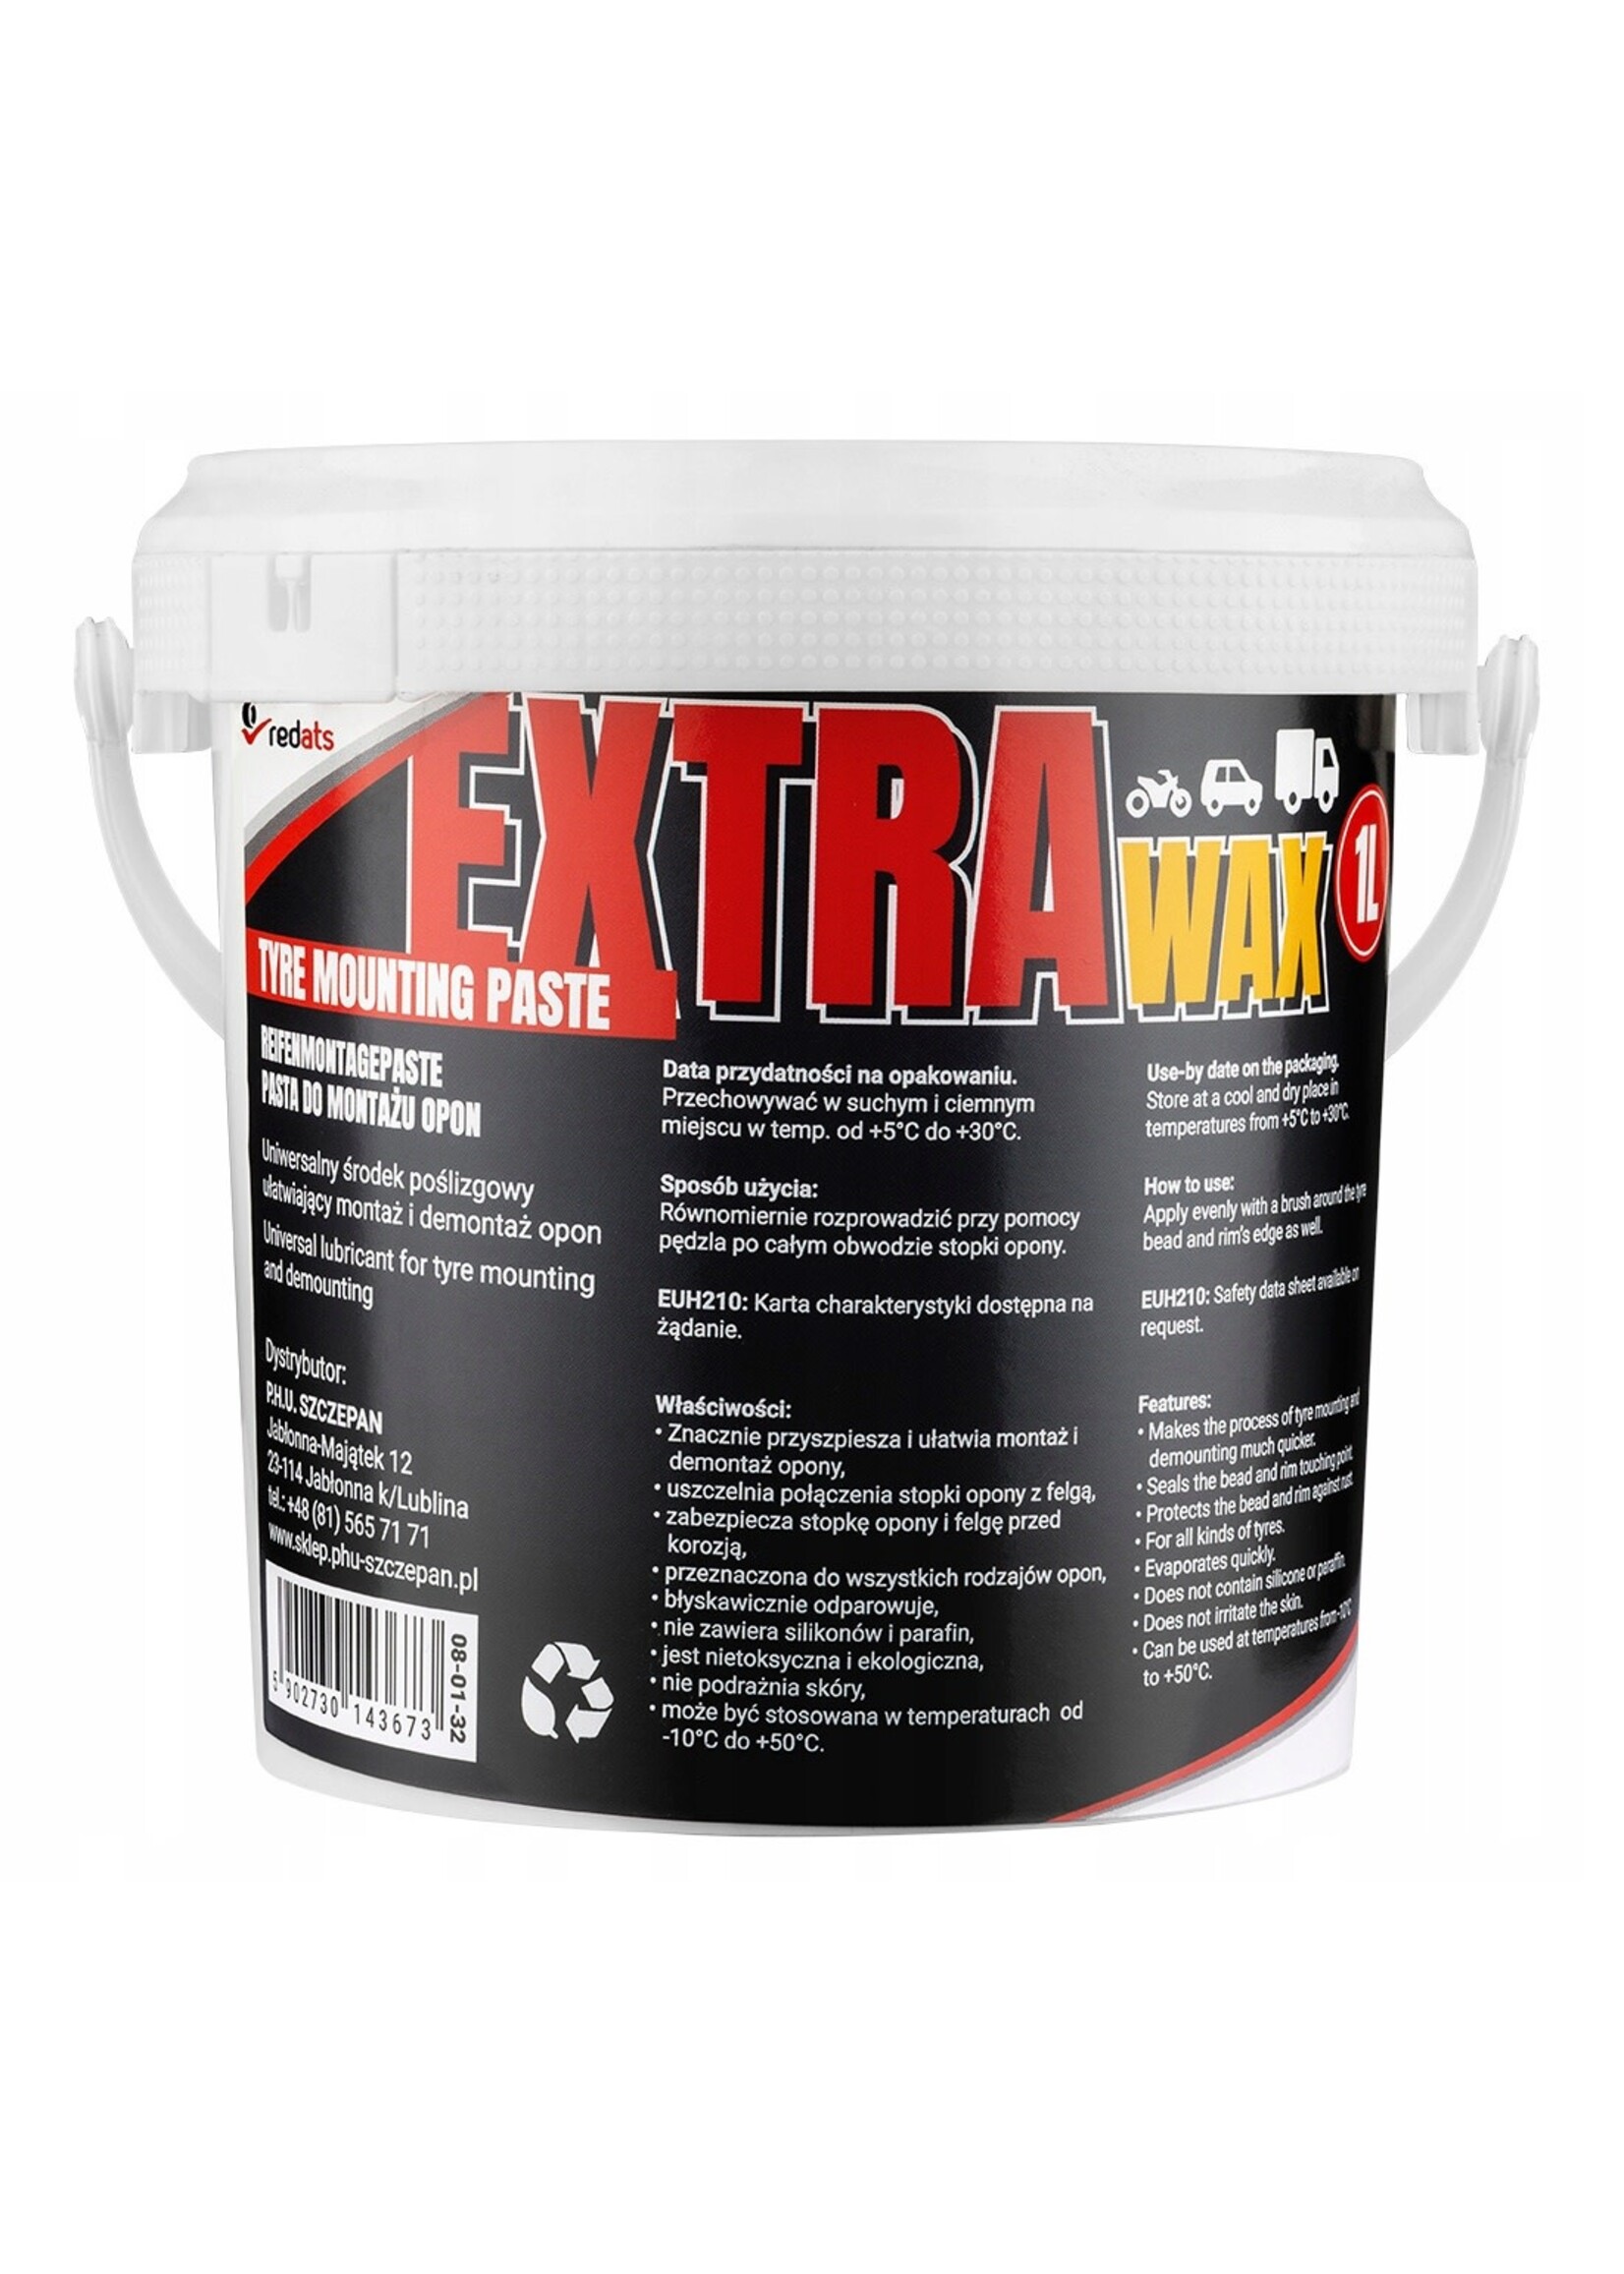 Redats tyre mounting paste extra wax Redats